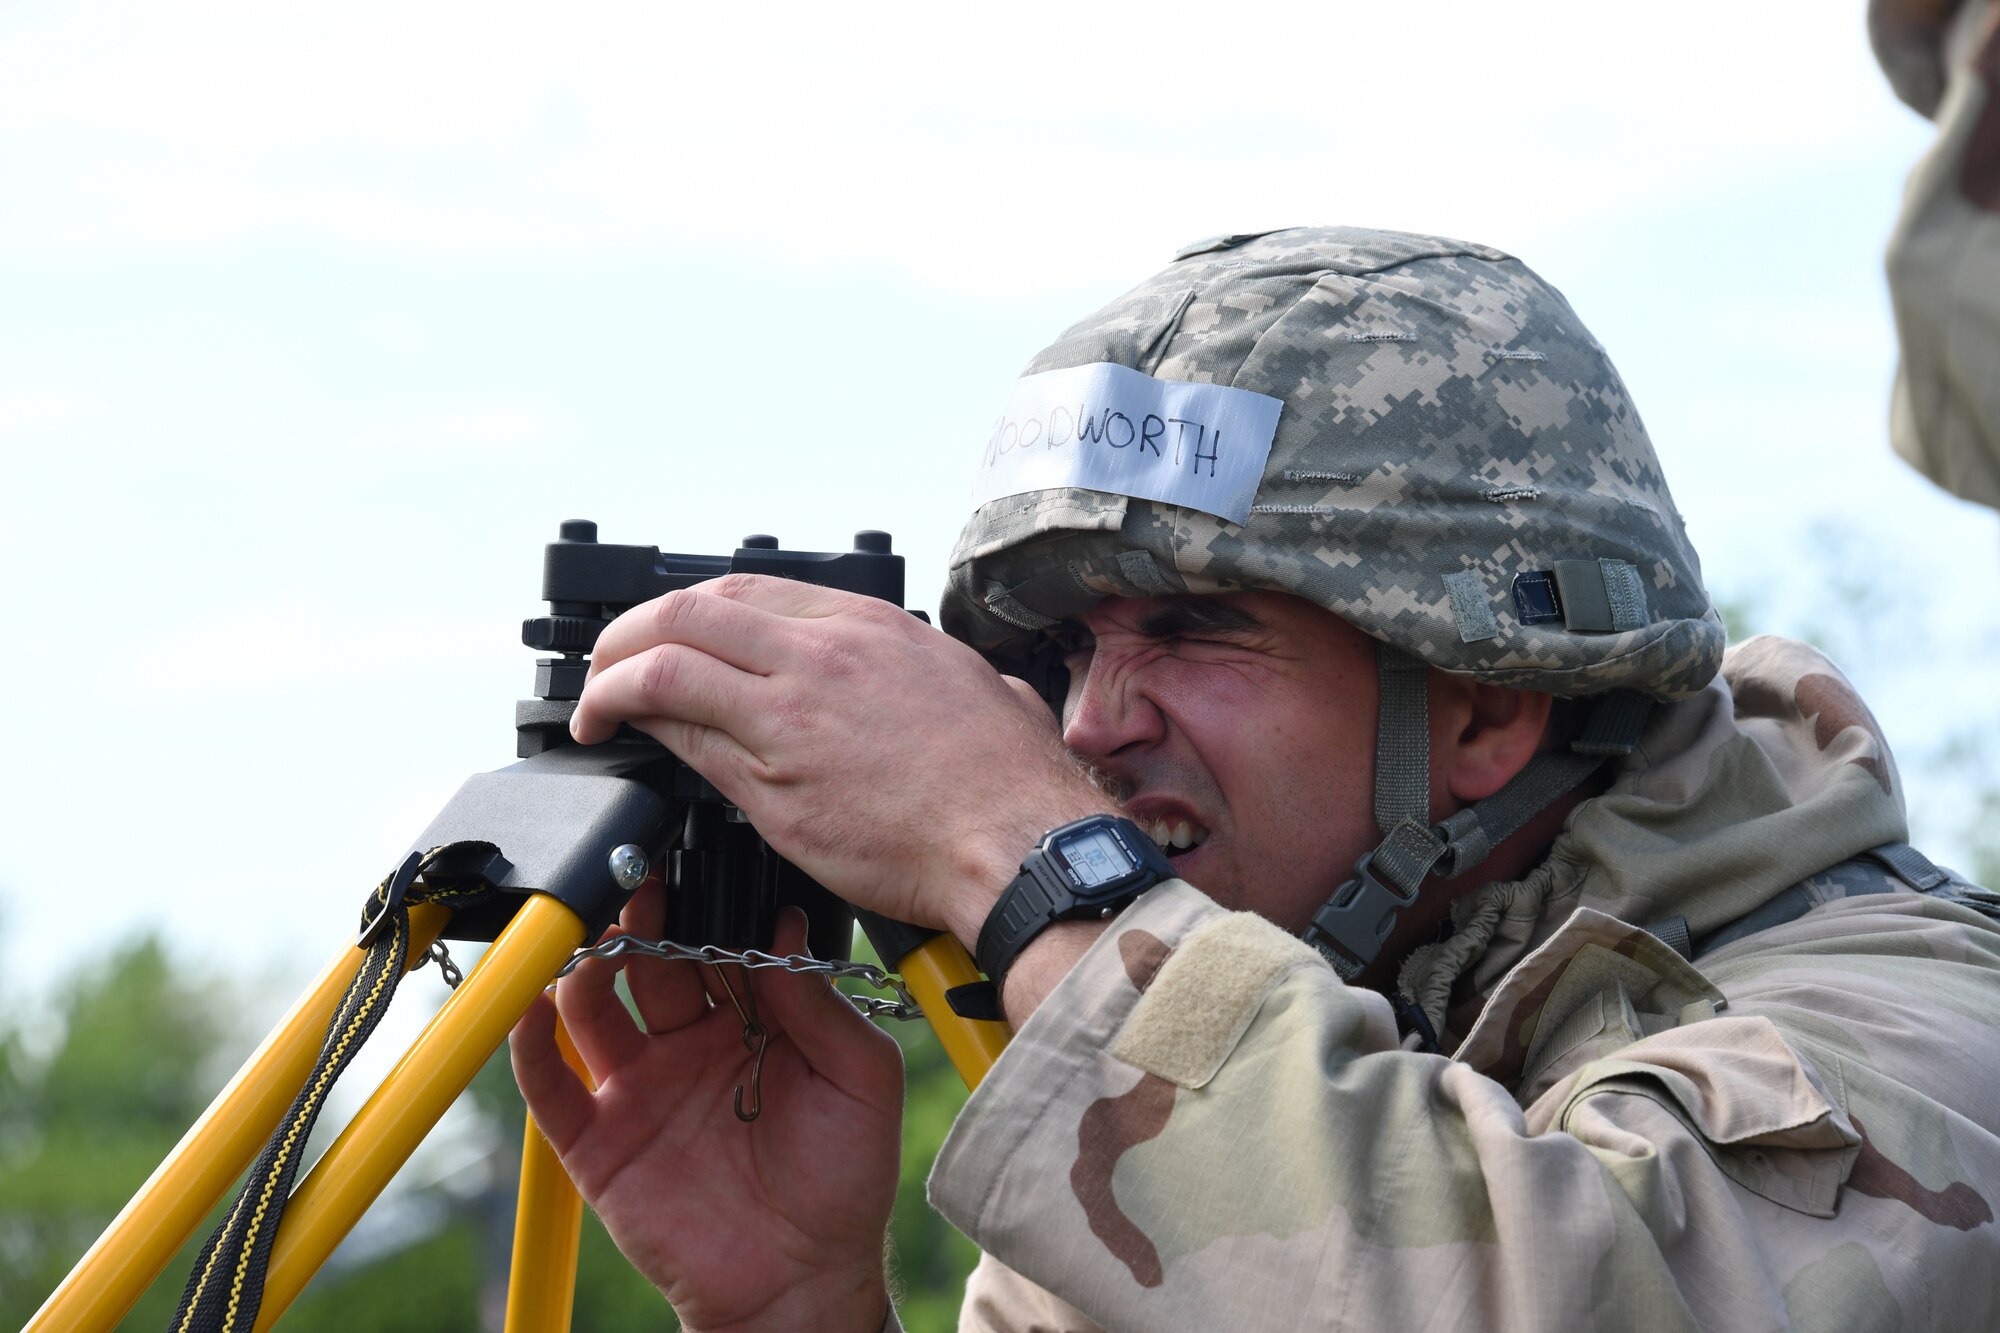 Airman 1st Class Robert Woodworth, engineer apprentice with the 319th Civil Engineer Squadron, uses optical survey equipment to provide accuracy to the pavement and construction Airmen building a berm during a training June 1, 2018, on Fargo Air National Guard Base, North Dakota. Engineer apprentices are essential during war-time missions, to efficiently organize structures when building a new base. (U.S. Air Force photo by Airman 1st Class Elora J. Martinez)